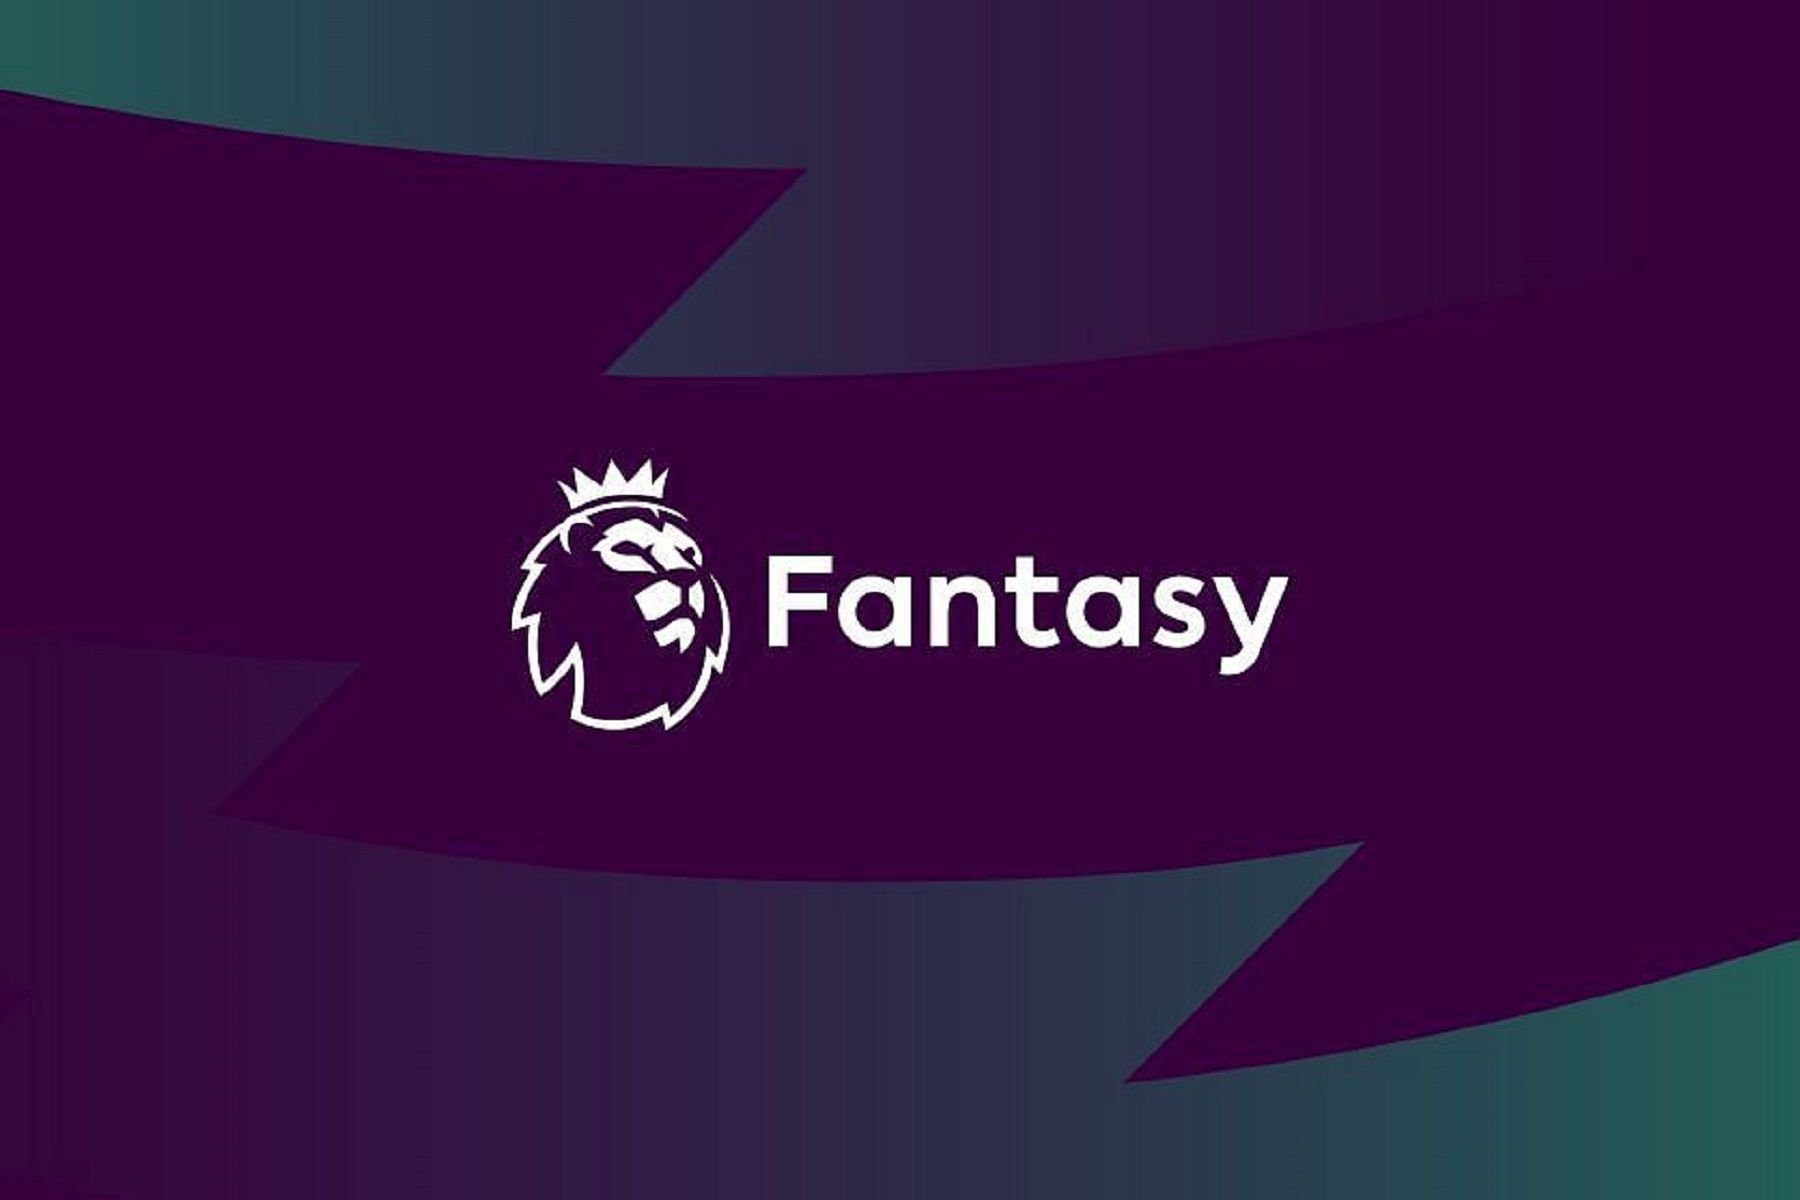 A blank for Arsenal in Gameweek 20 could hurt FPL managers. (Image Courtesy: premierleague.com)